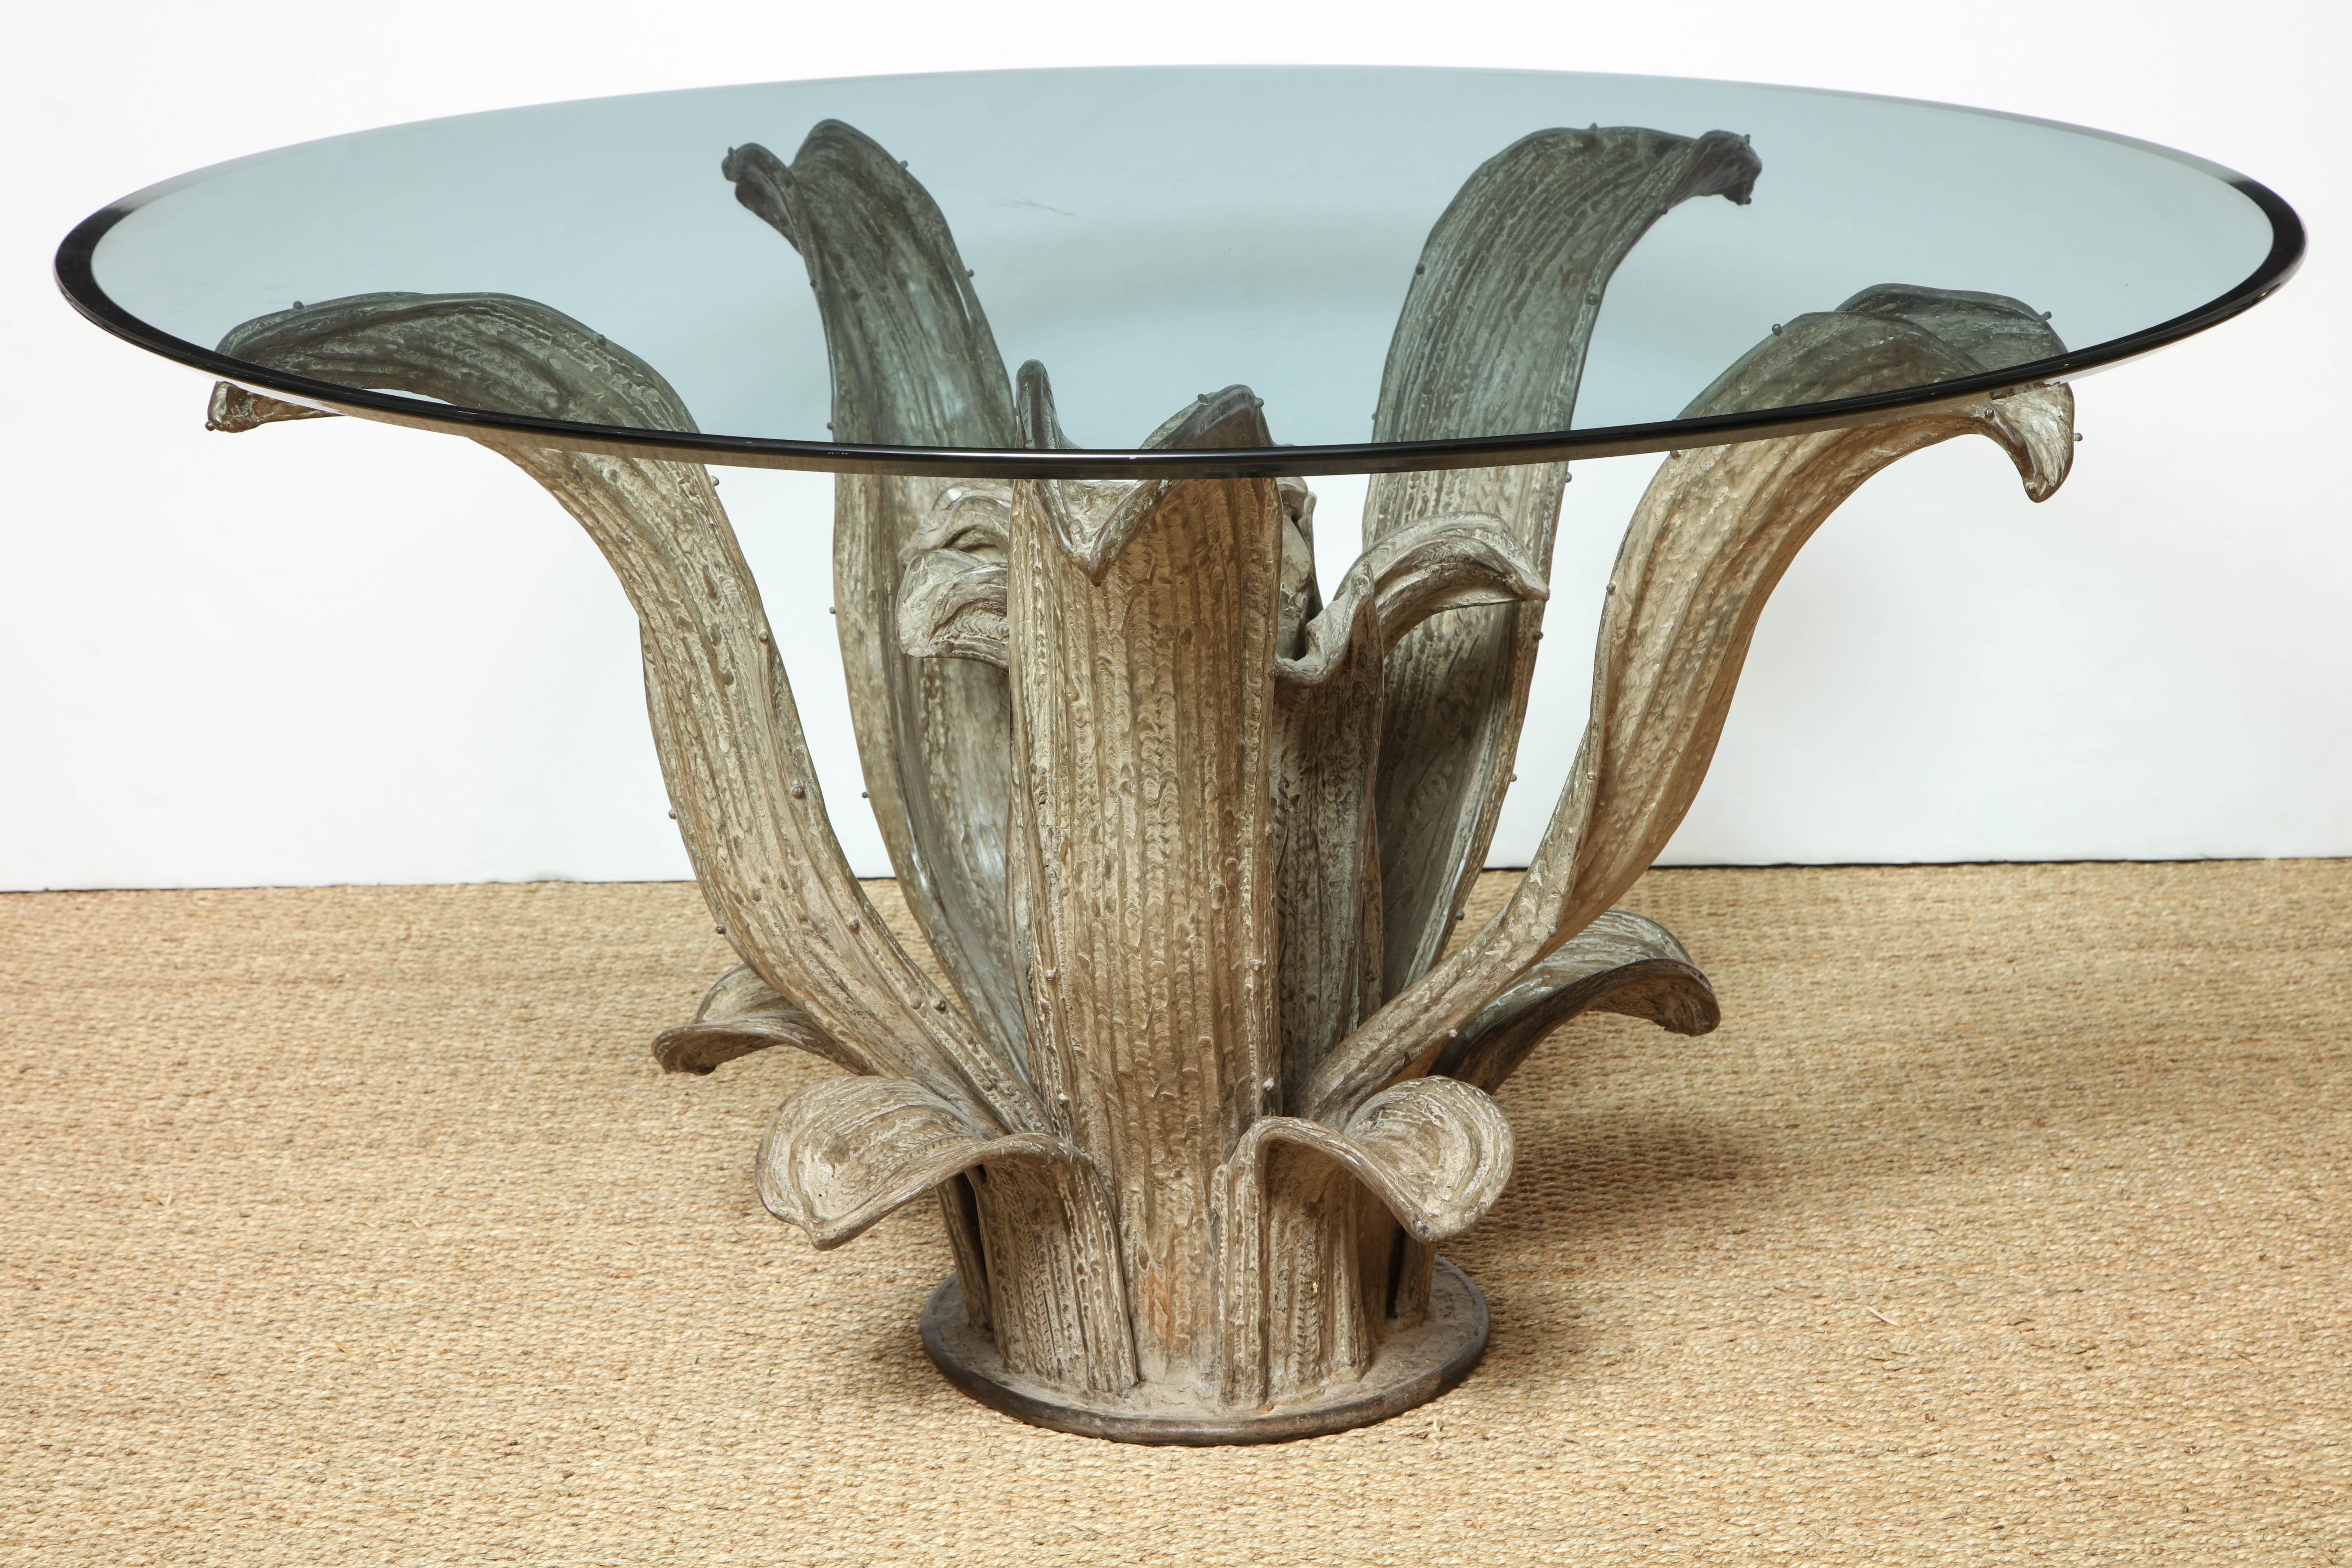 Sculptural center table base in the form of an agave cactus plant with a large circular glass top, (some scratches to glass). Base is flame worked and hammered brass with a natural patina. Excellent condition.
 Base measures 48